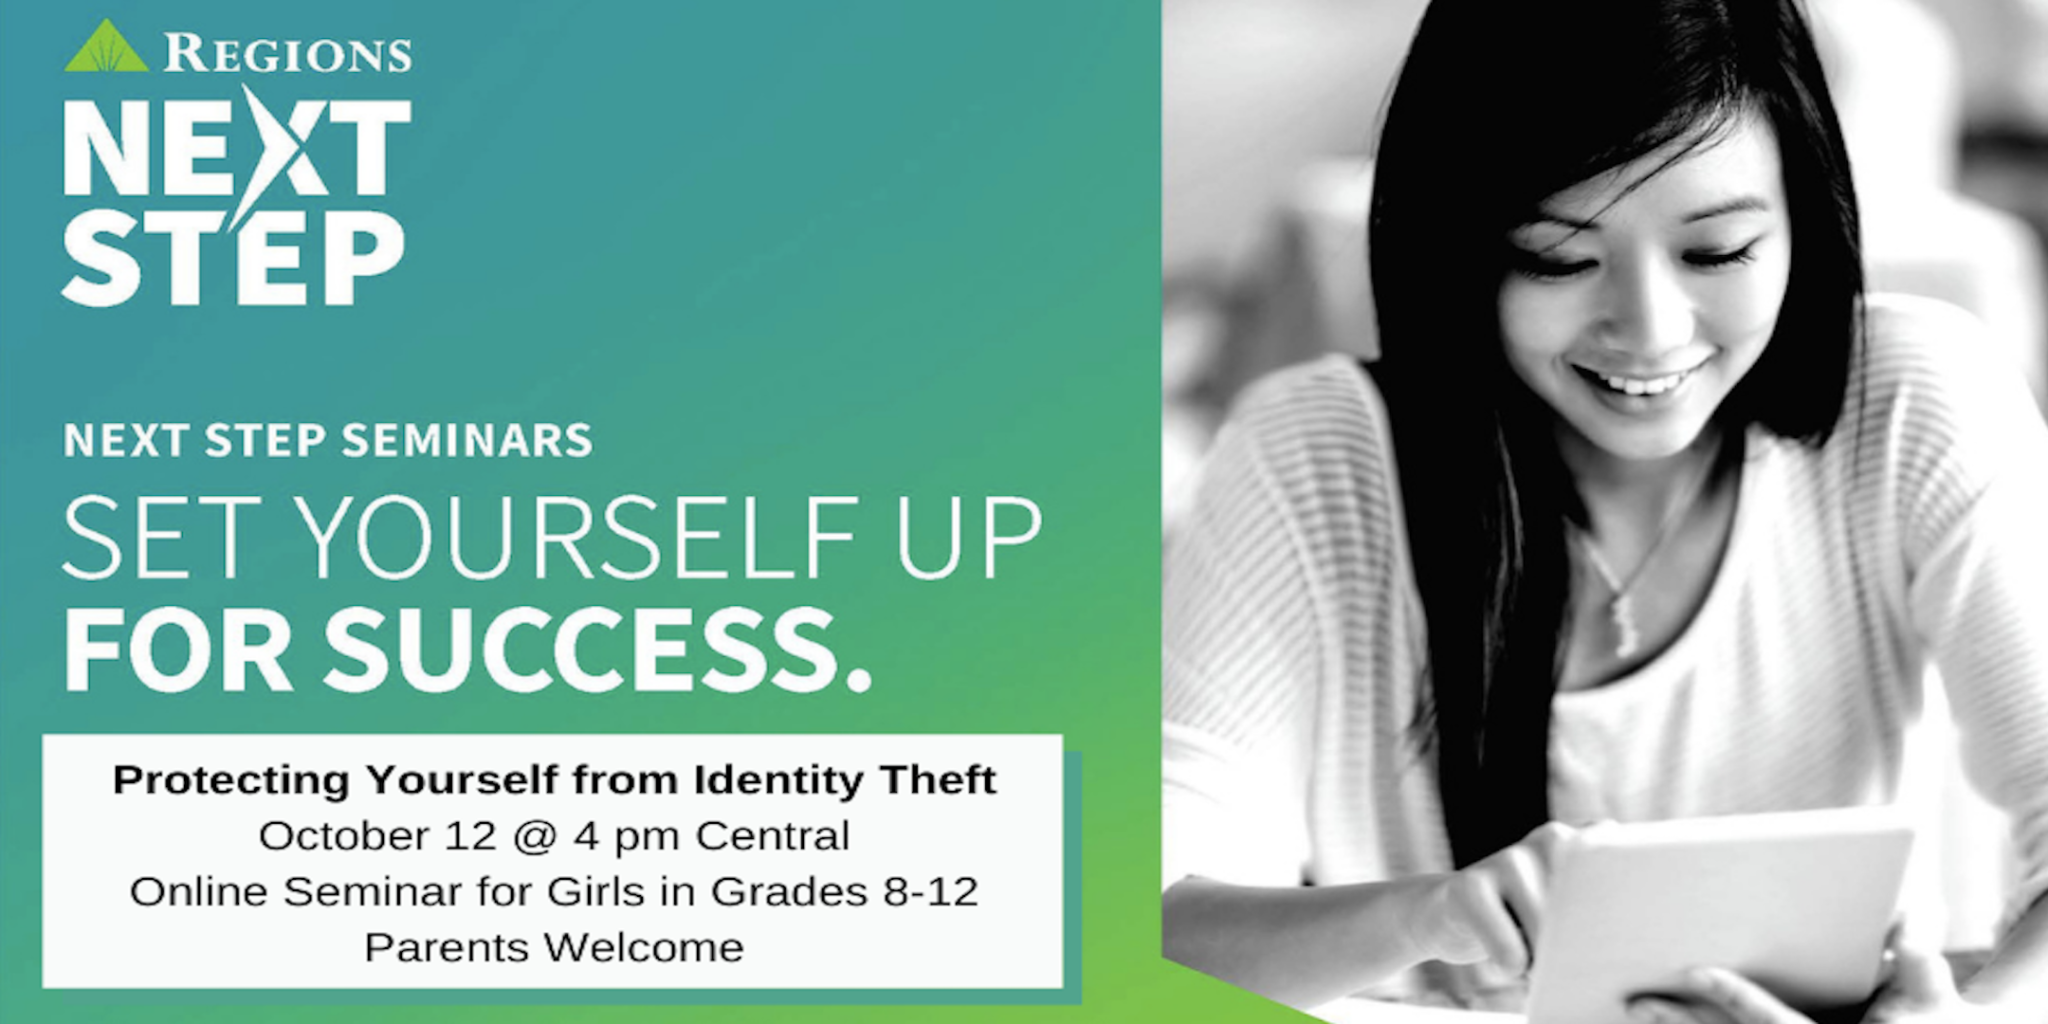 IdentityTheft FB Protecting Yourself from Identity Theft - Banking for Students presented by Regions